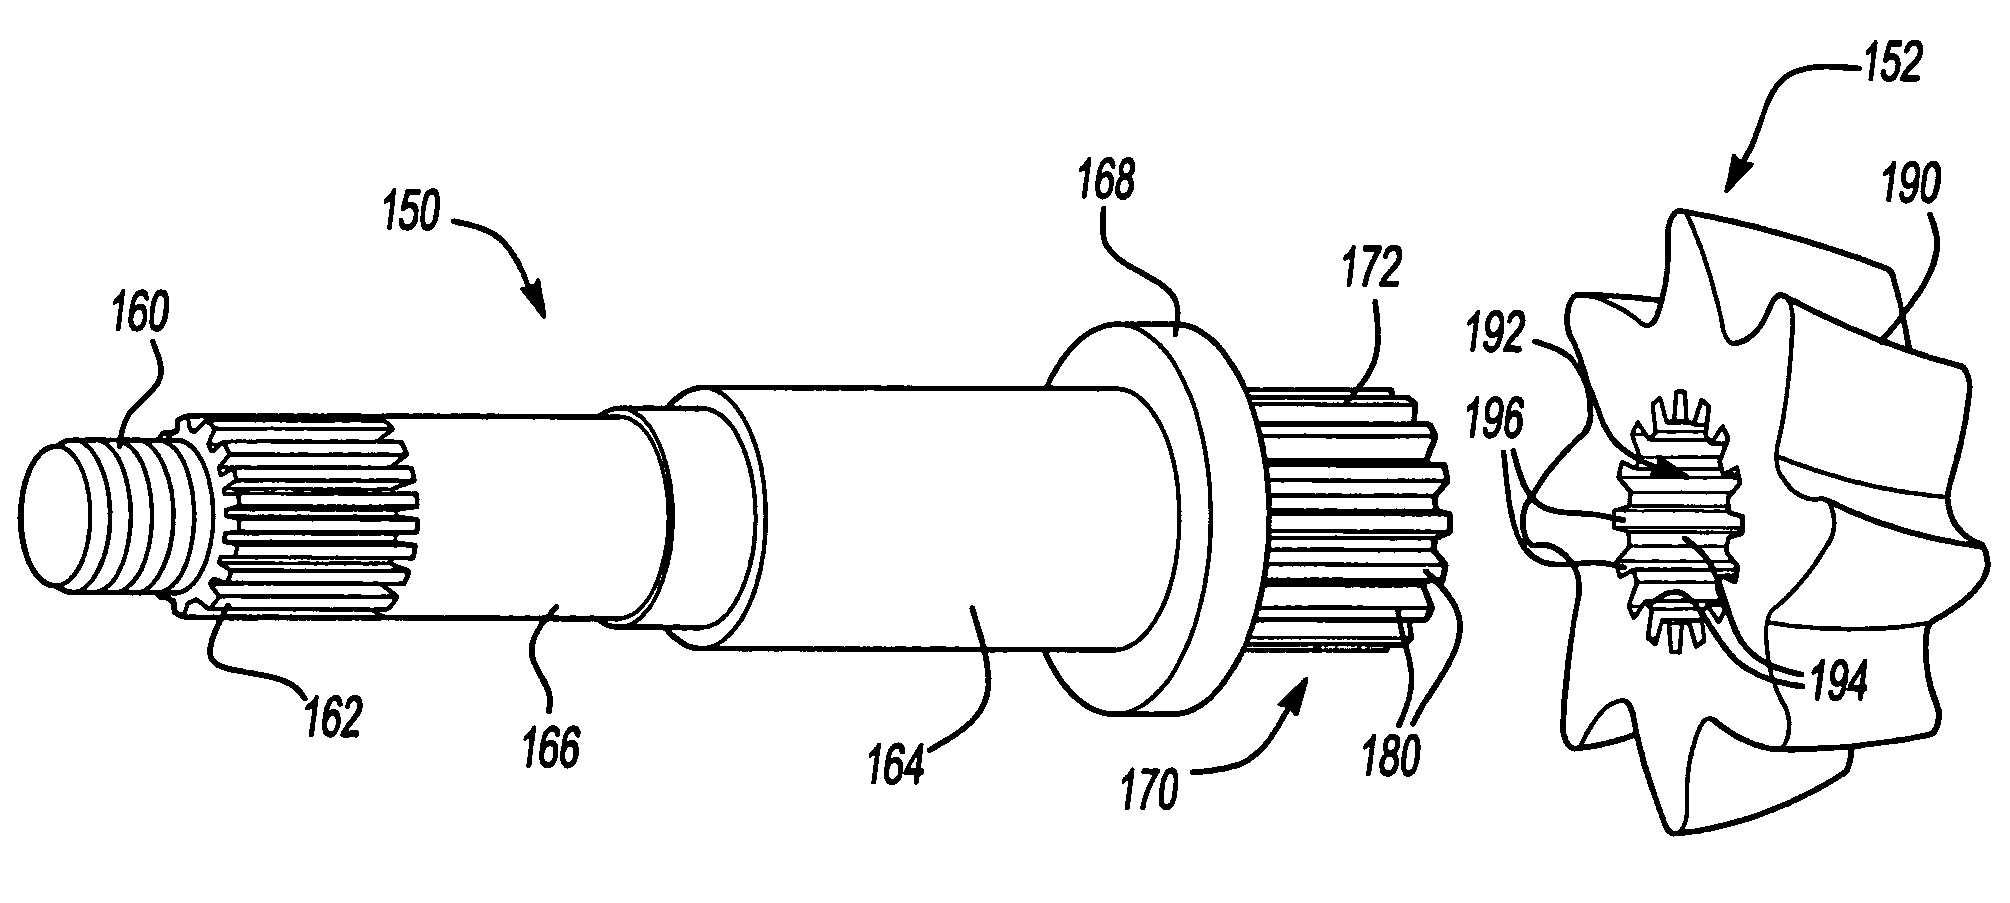 Method of manufacturing an automotive differential having an input pinion